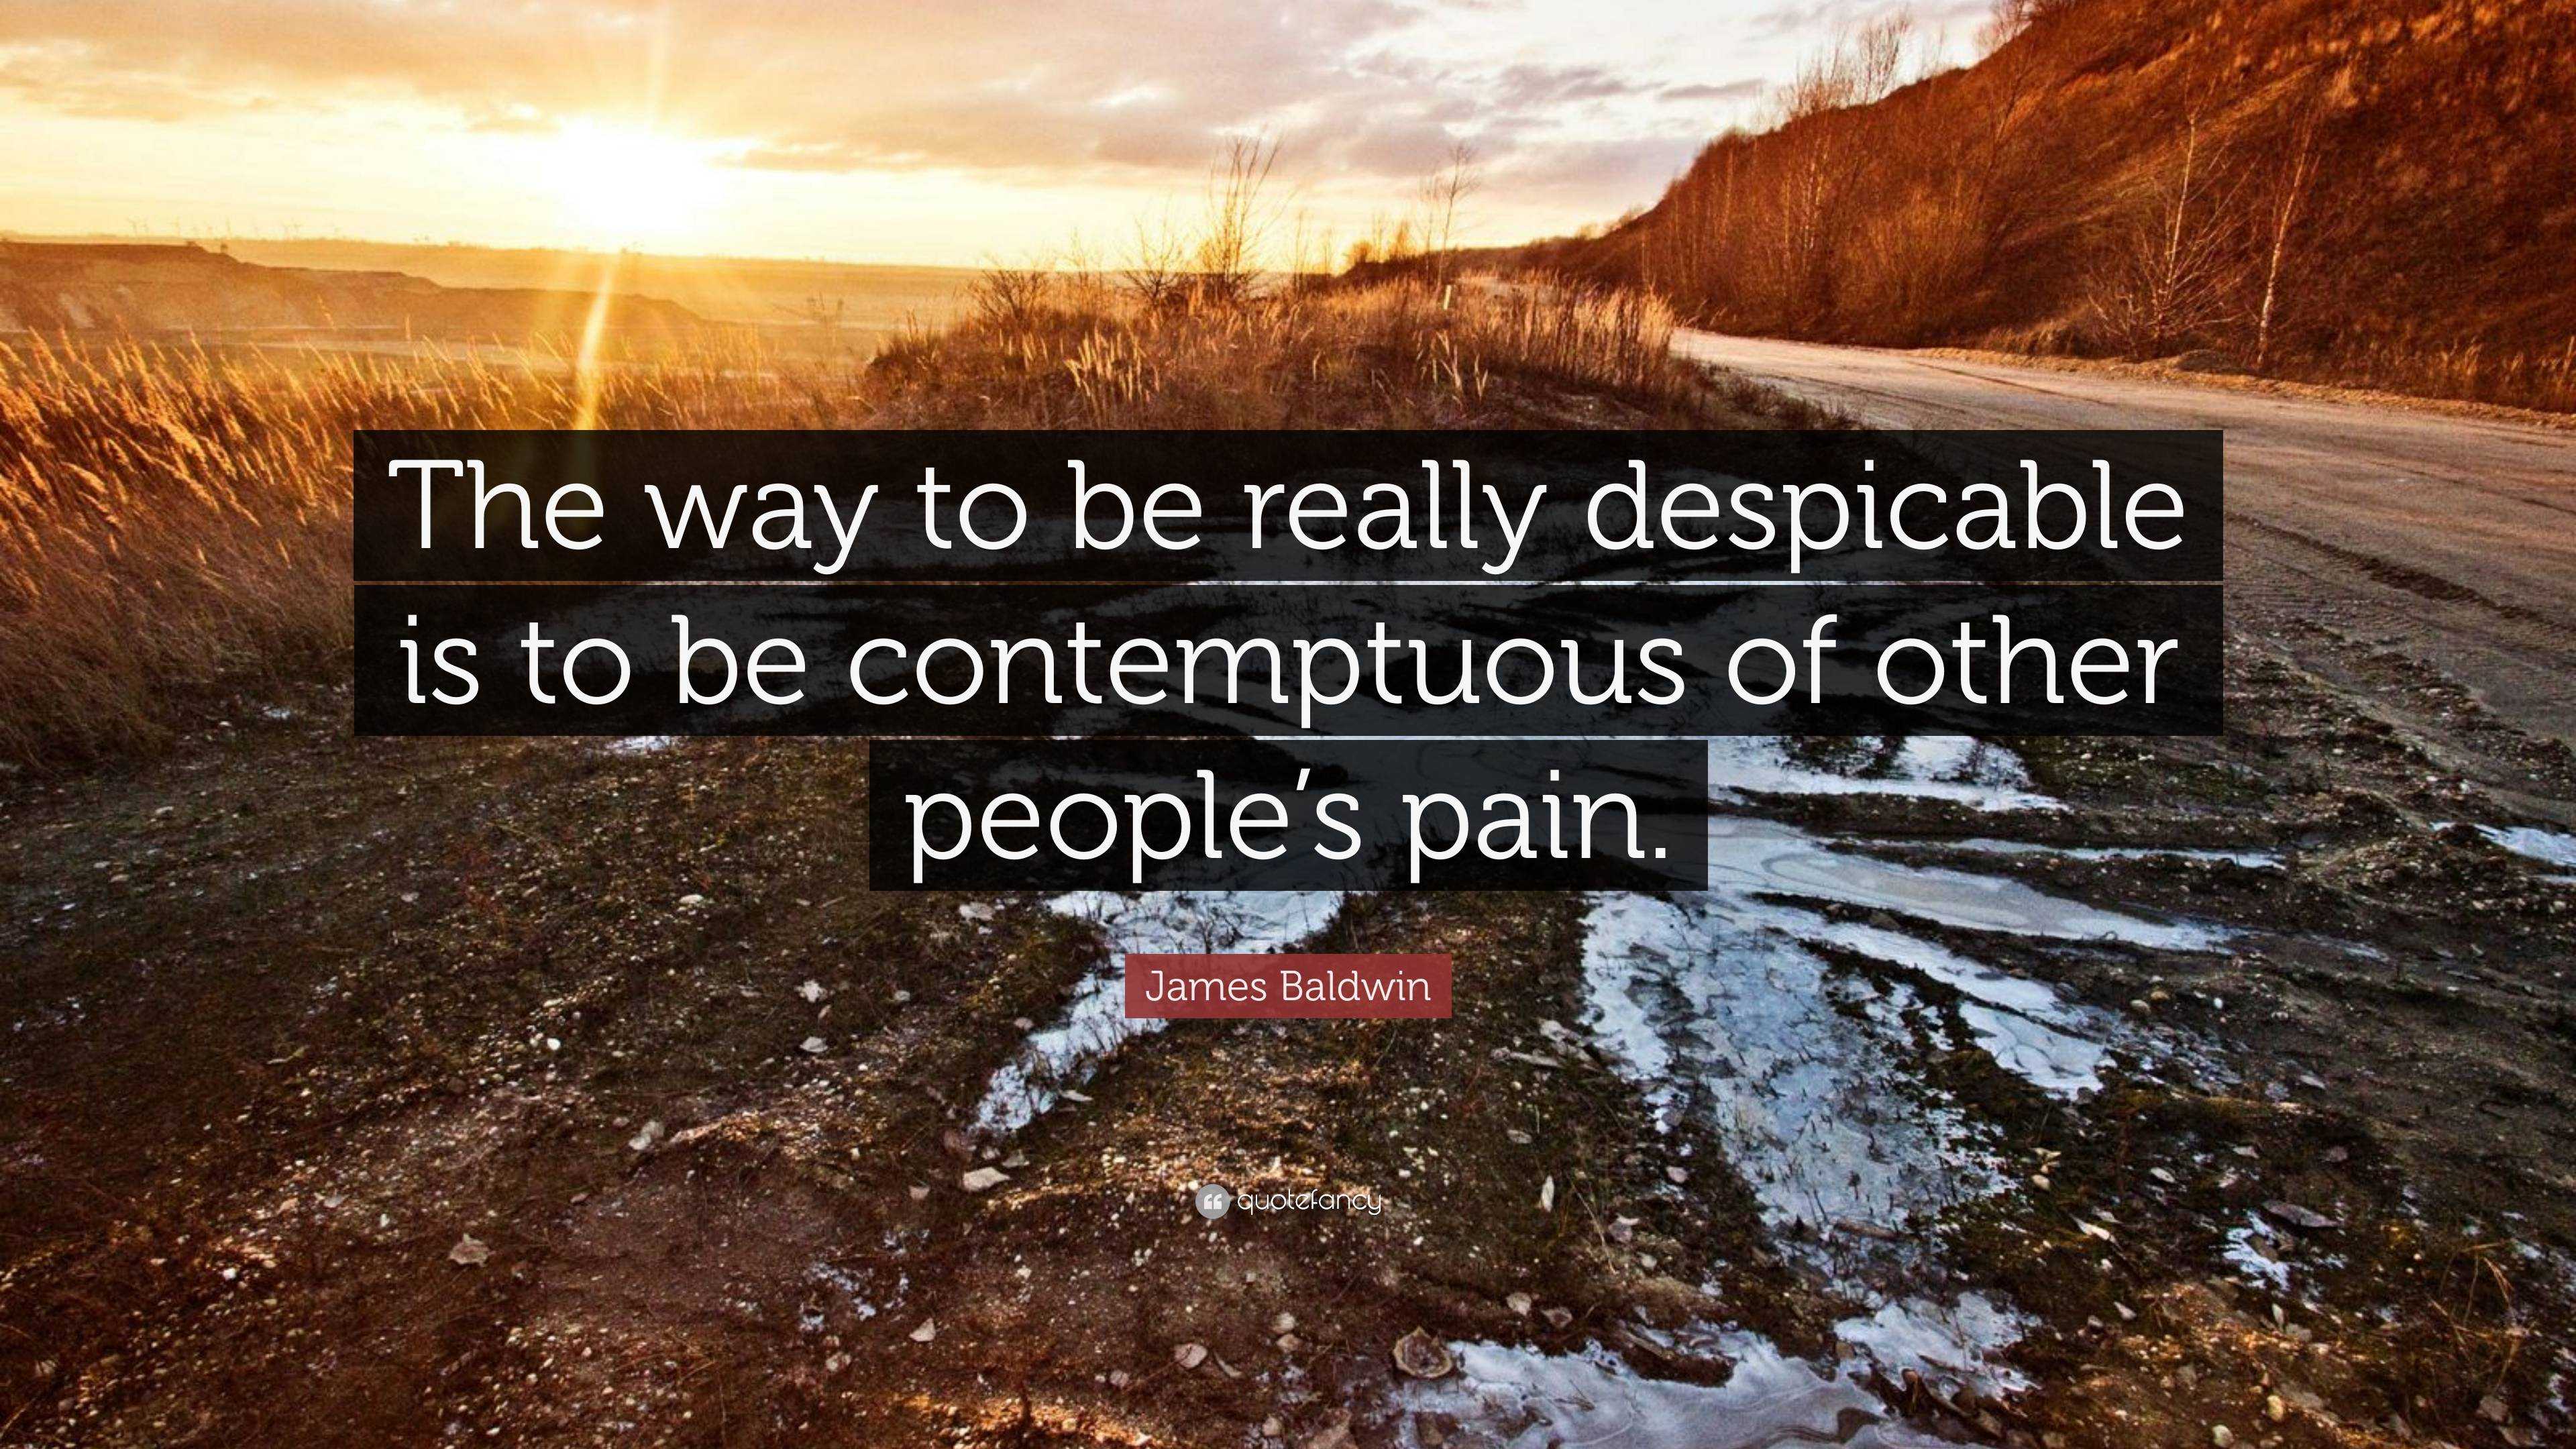 James Baldwin Quote: “The way to be really despicable is to be ...